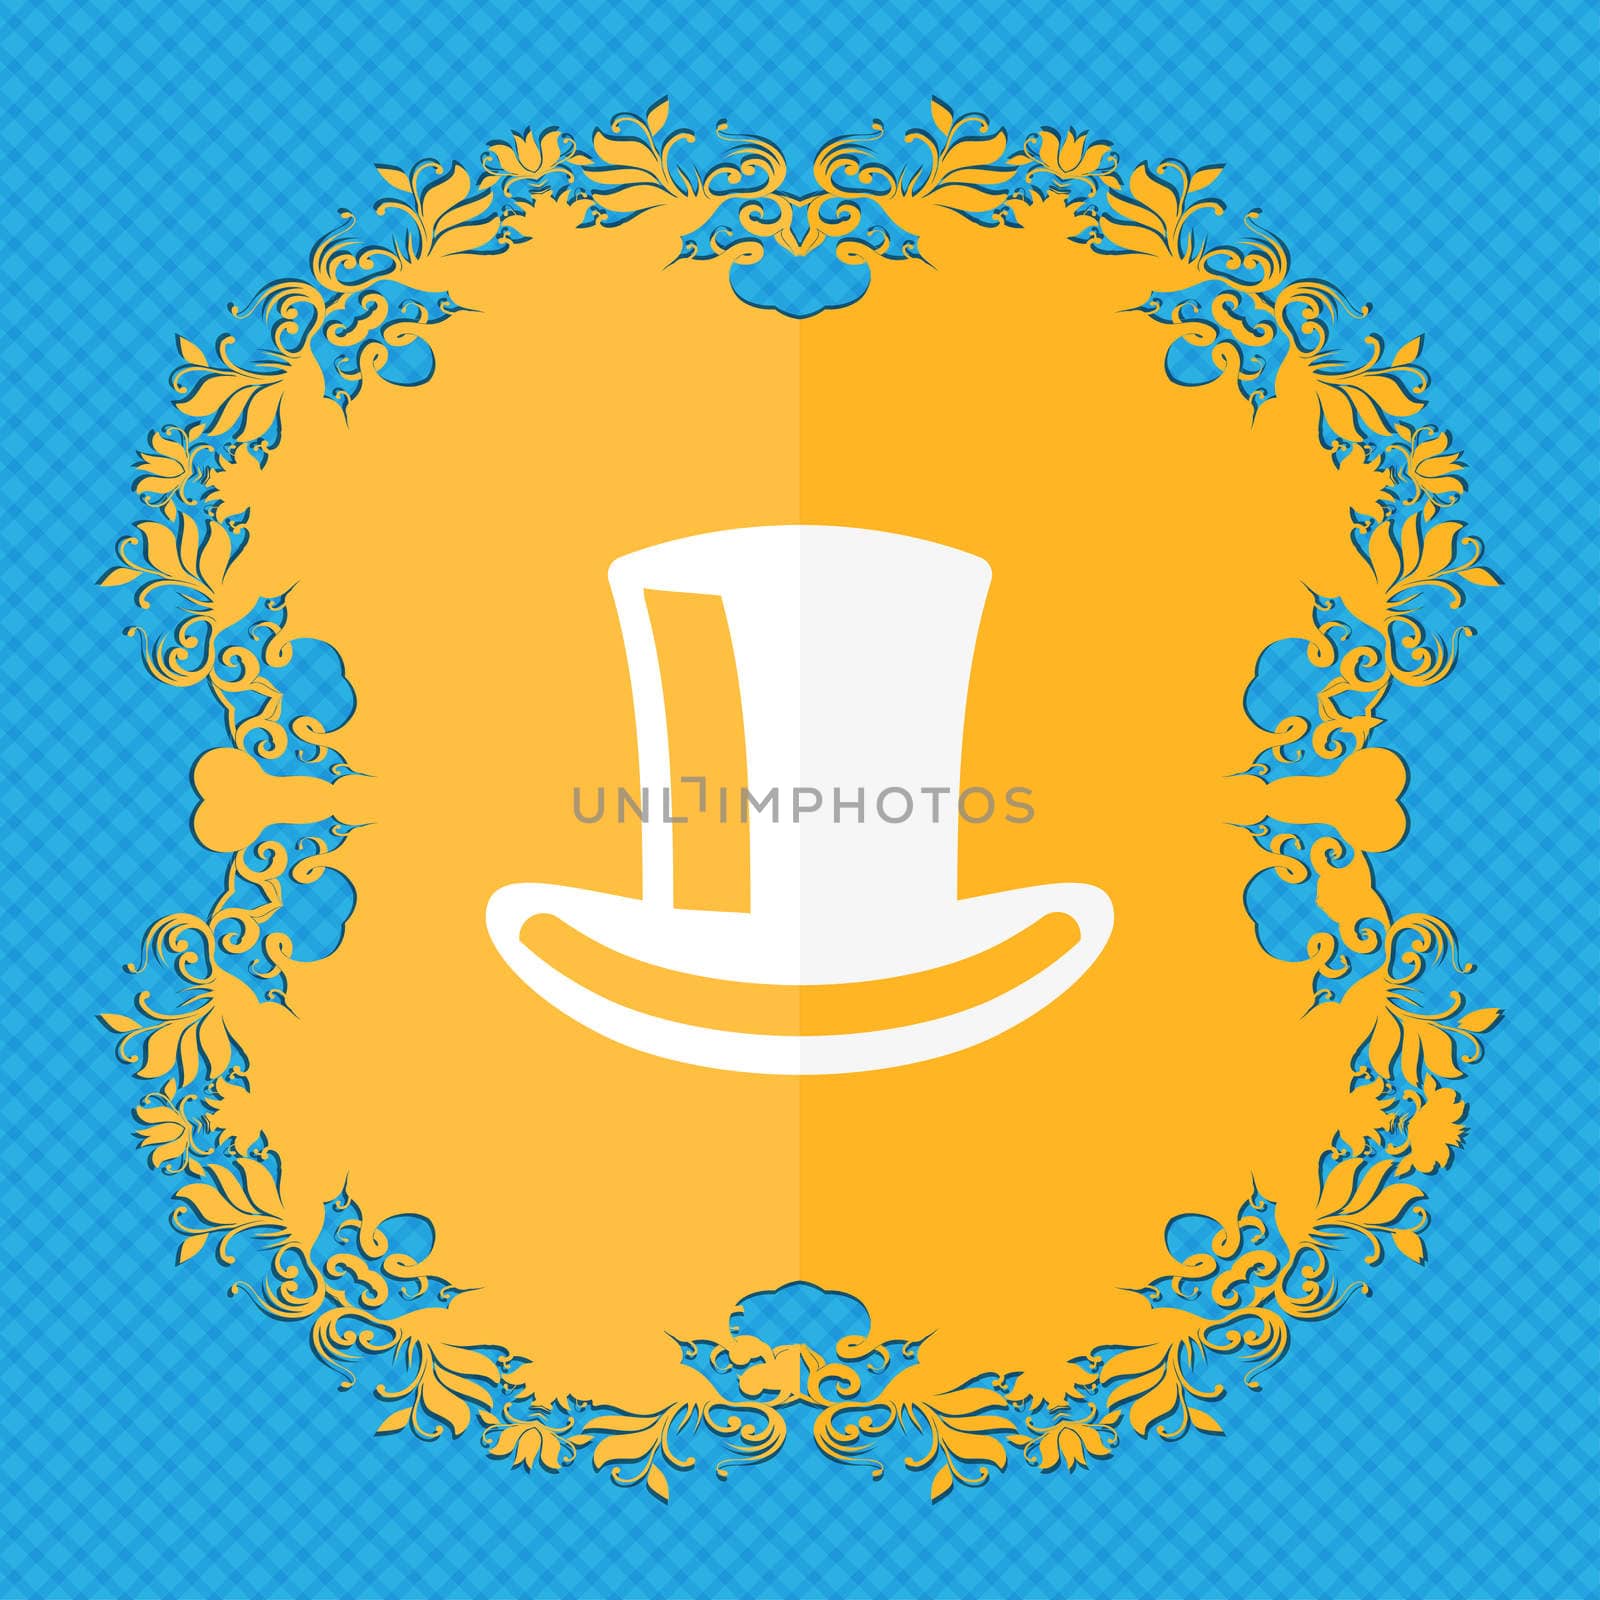 cylinder hat . Floral flat design on a blue abstract background with place for your text. illustration